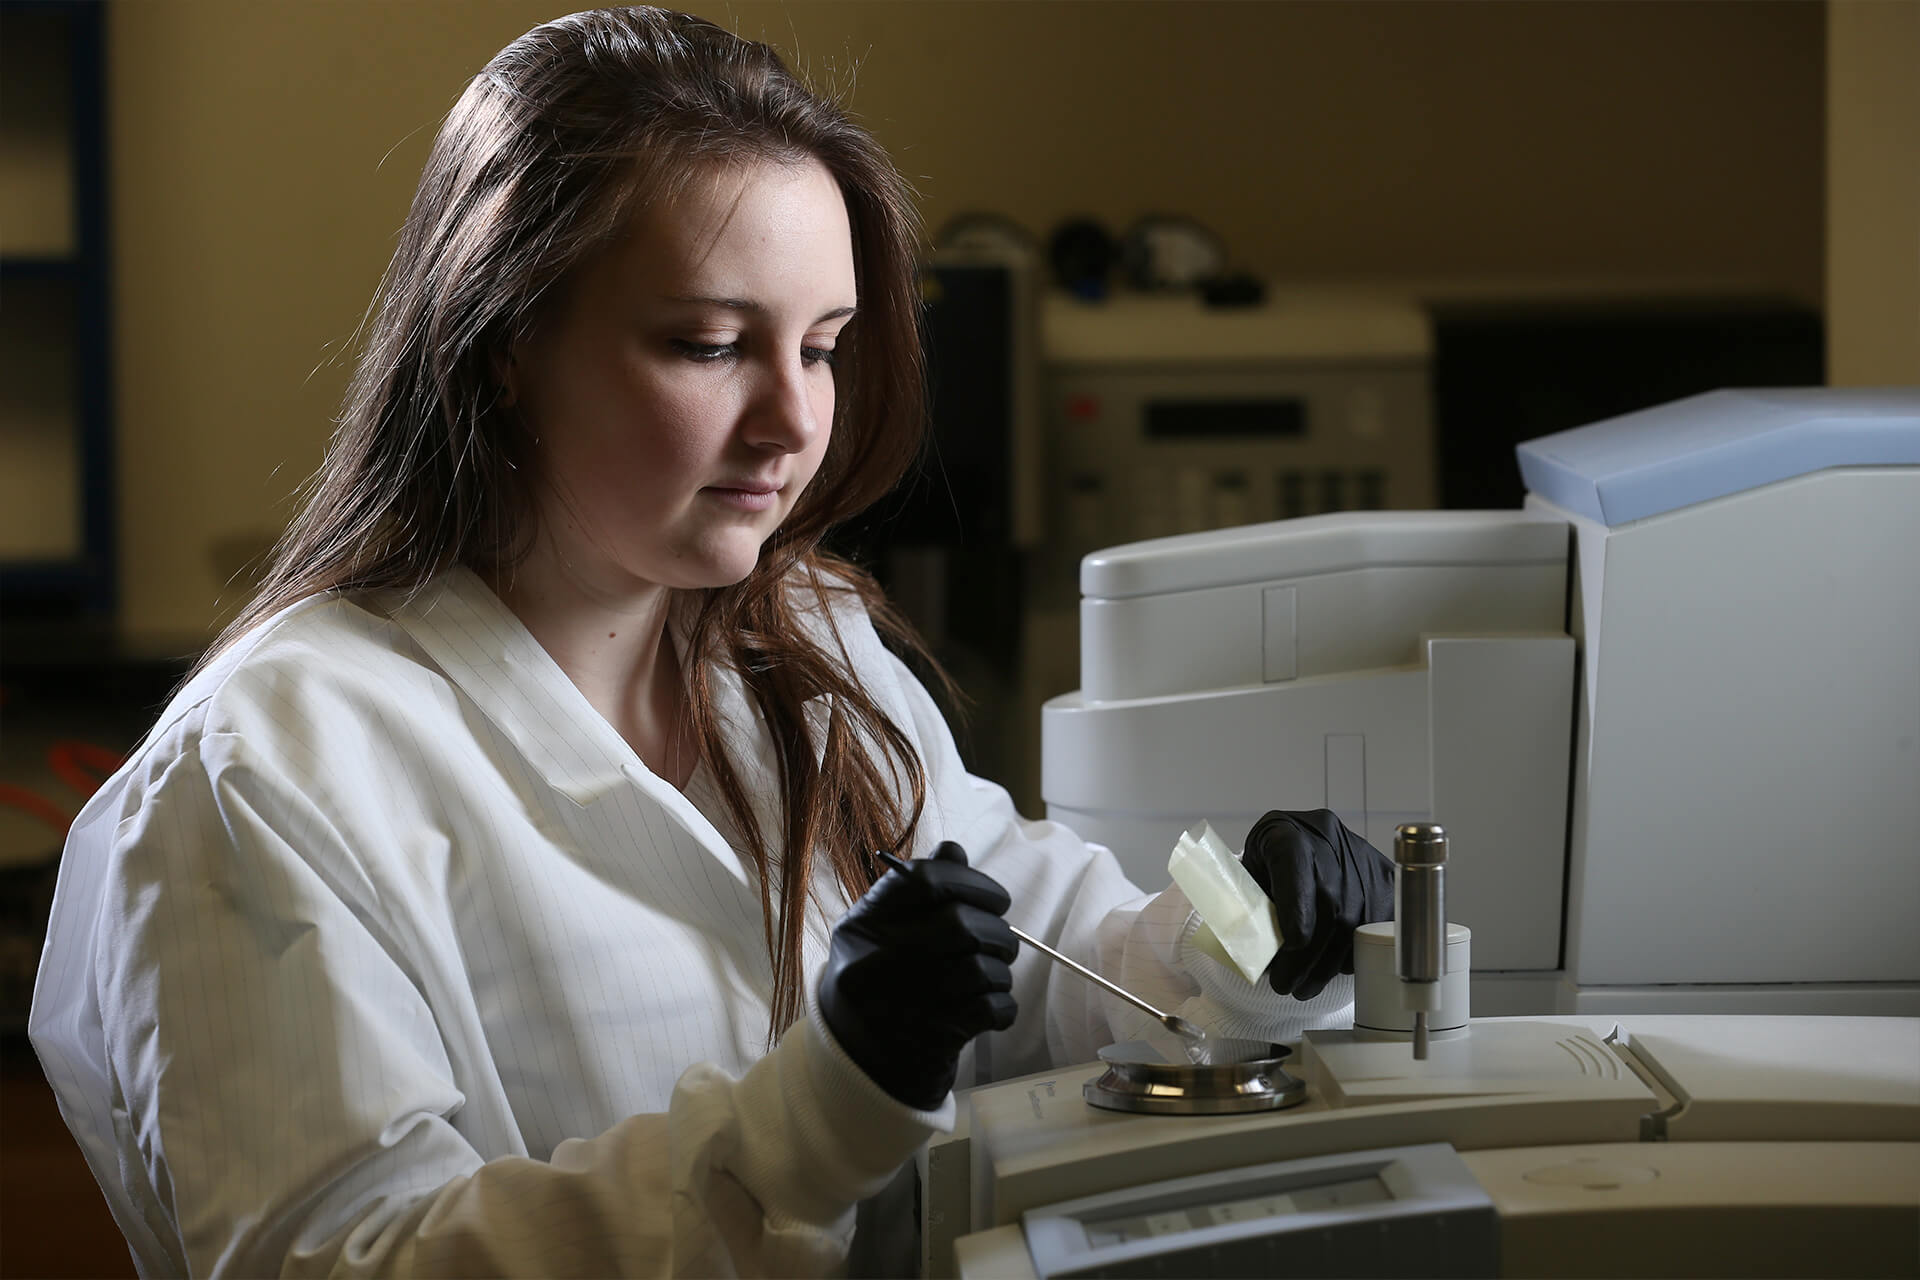 A BGSU forensic chemistry student examines forensic evidence in one of the Ohio based forensic labs.